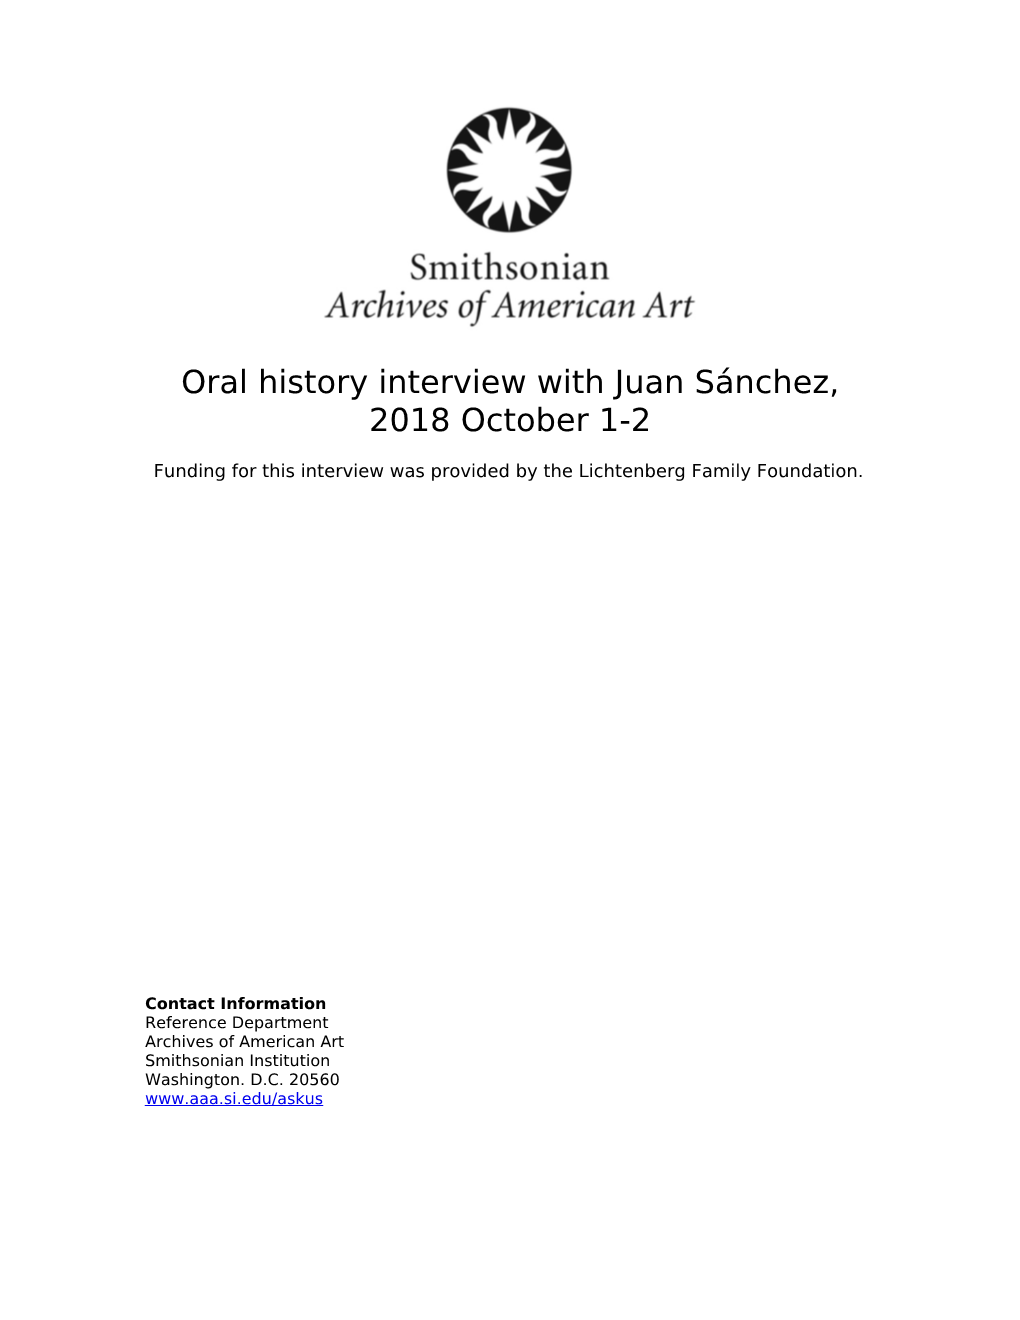 Oral History Interview with Juan Sánchez, 2018 October 1-2